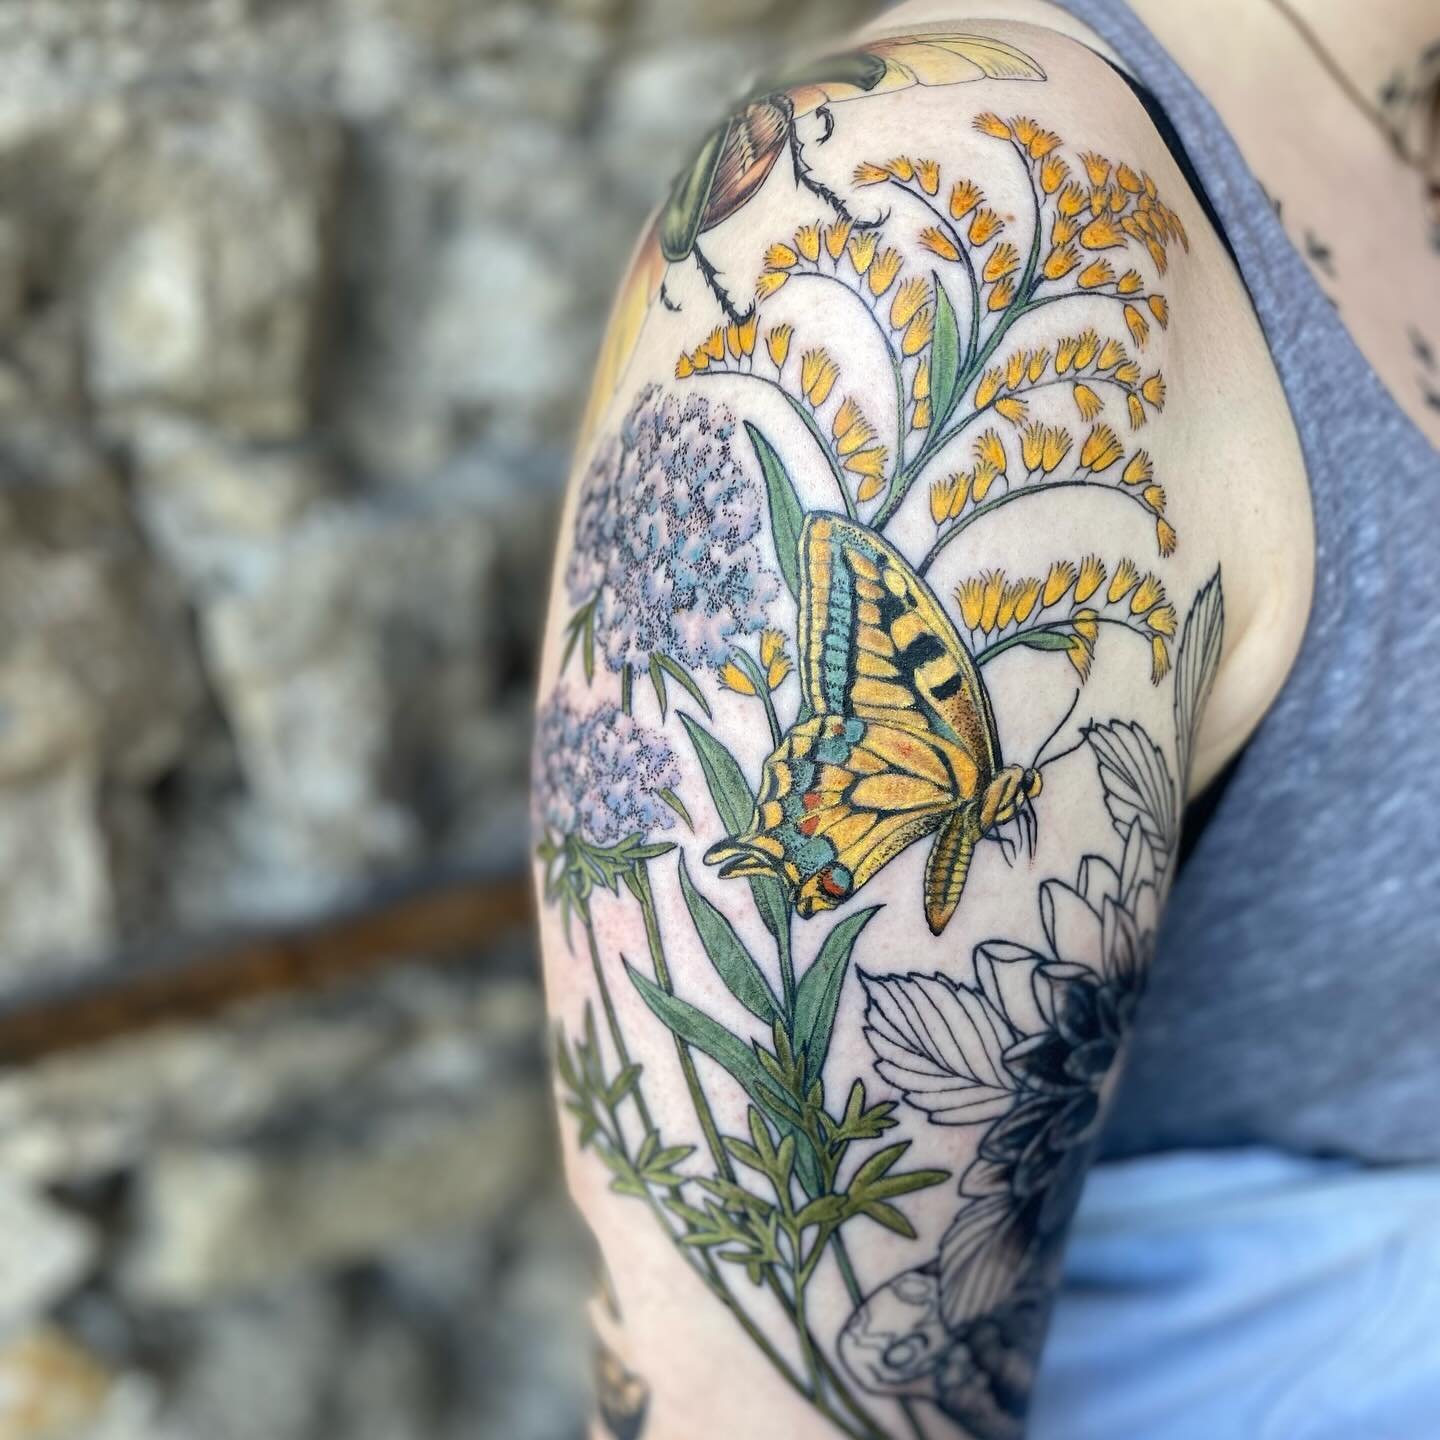 In progress ✨ always an honour to tattoo another tattooer, thanks to @hayvenbowman for asking me to take on finishing up your upper arm. More to come 🦋 🌸 go follow Hayven she is sick at tats

Made @springfevertattoo #tattoo #botanicaltattoo #floraa